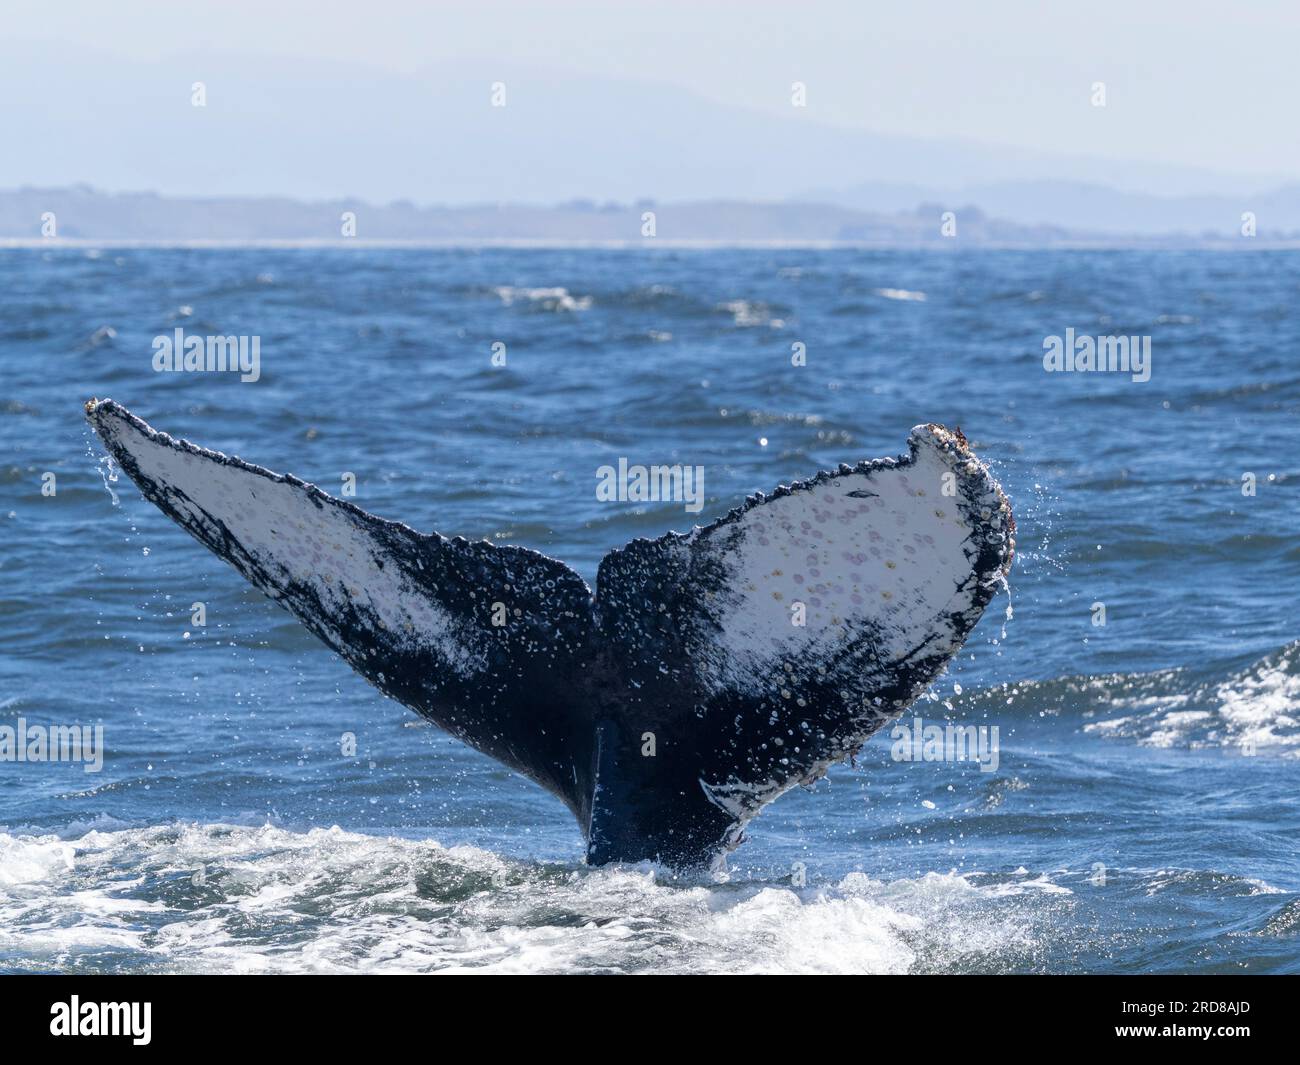 An adult humpback whale (Megaptera novaeangliae), flukes up dive in Monterey Bay Marine Sanctuary, California, United States of America, North America Stock Photo